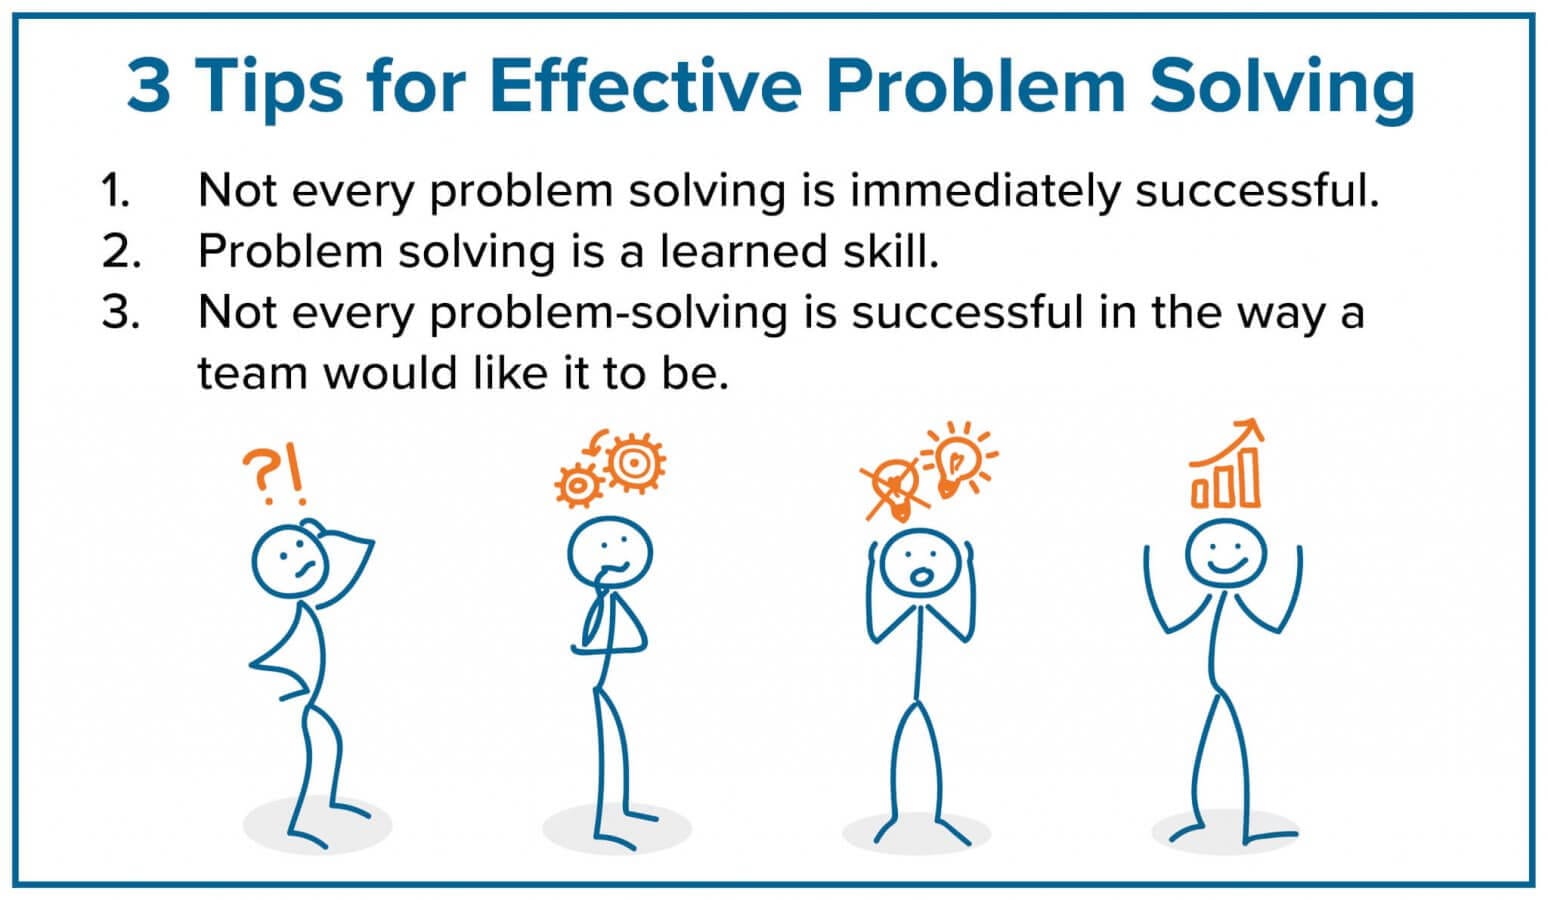 what are three common impediments to problem solving